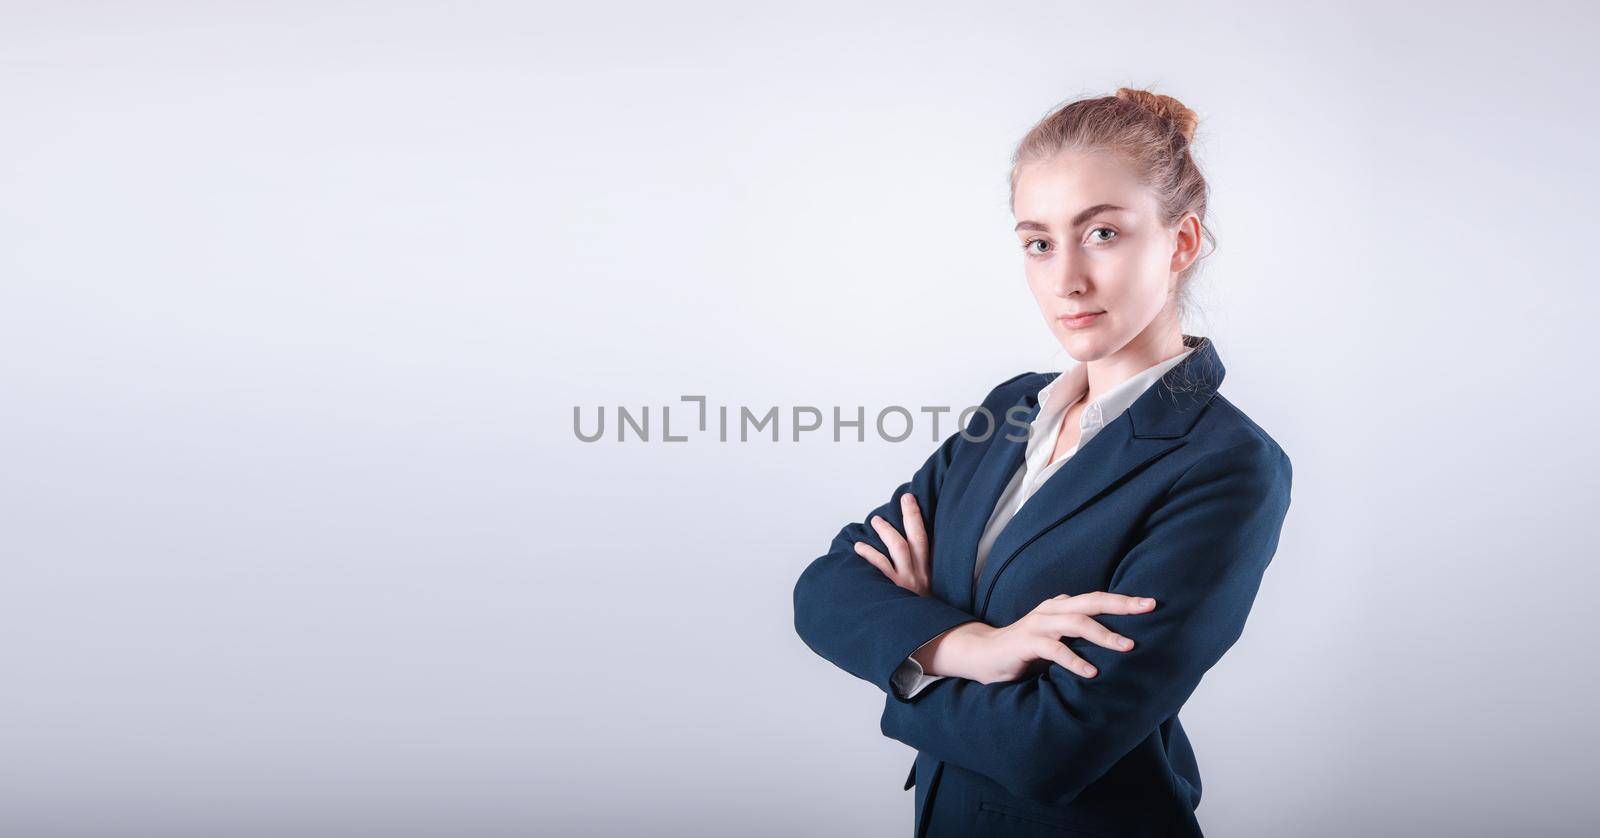 Portrait Attractive of Business Woman Executive Standing Against Isolated Background, Close-Up of Businesswoman in Formal Suit With Arms Crossed on Gray Backgrounds. Finance Employee Occupation